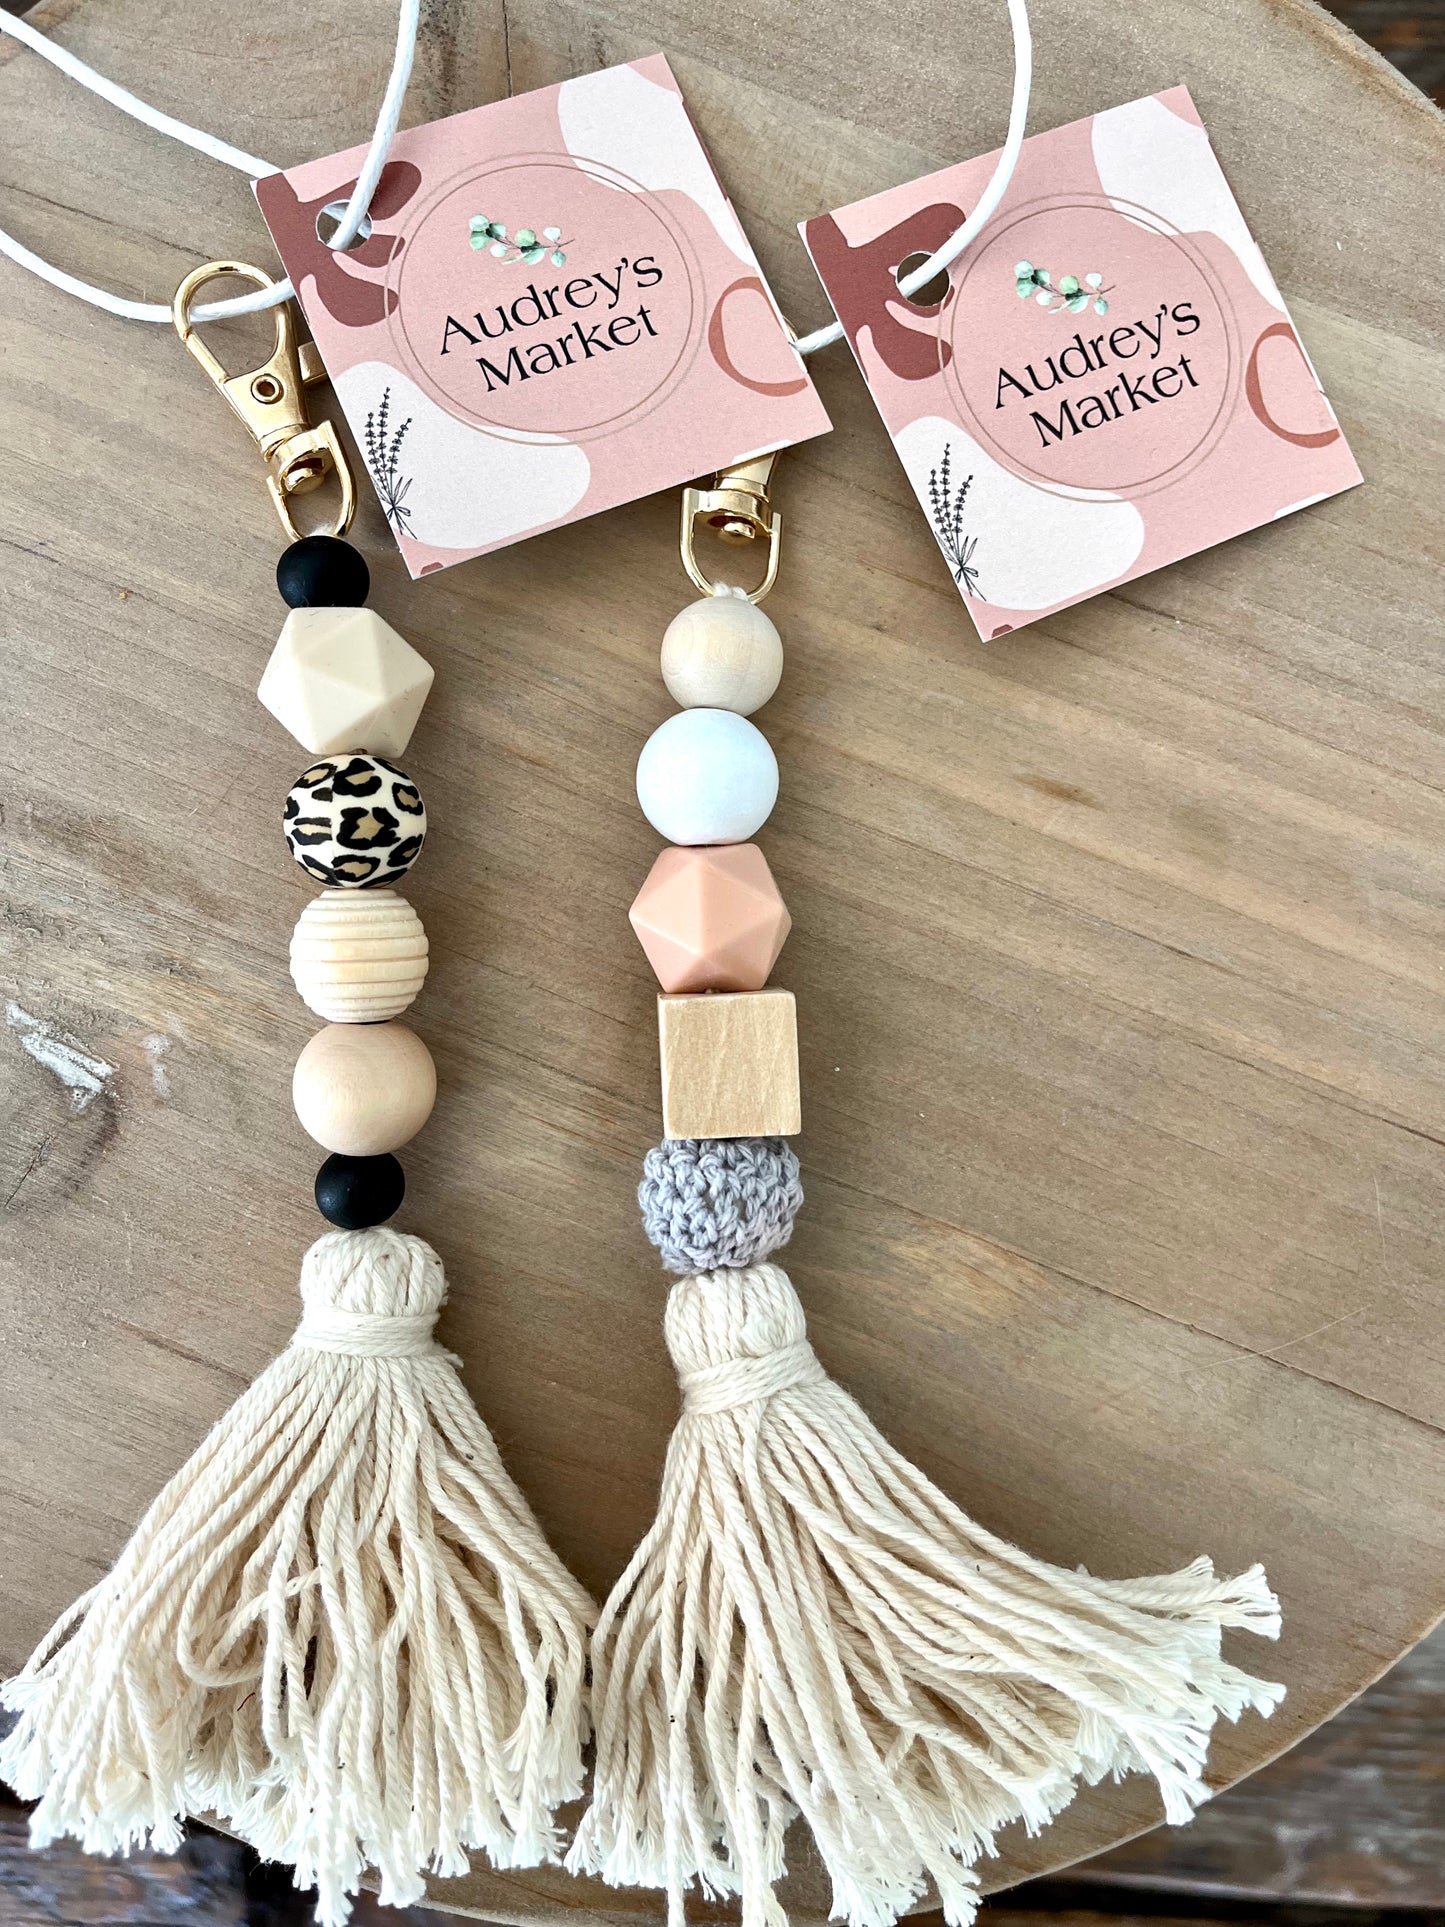 How to Make a Keychain with Natural Wood Beads and a Tassel